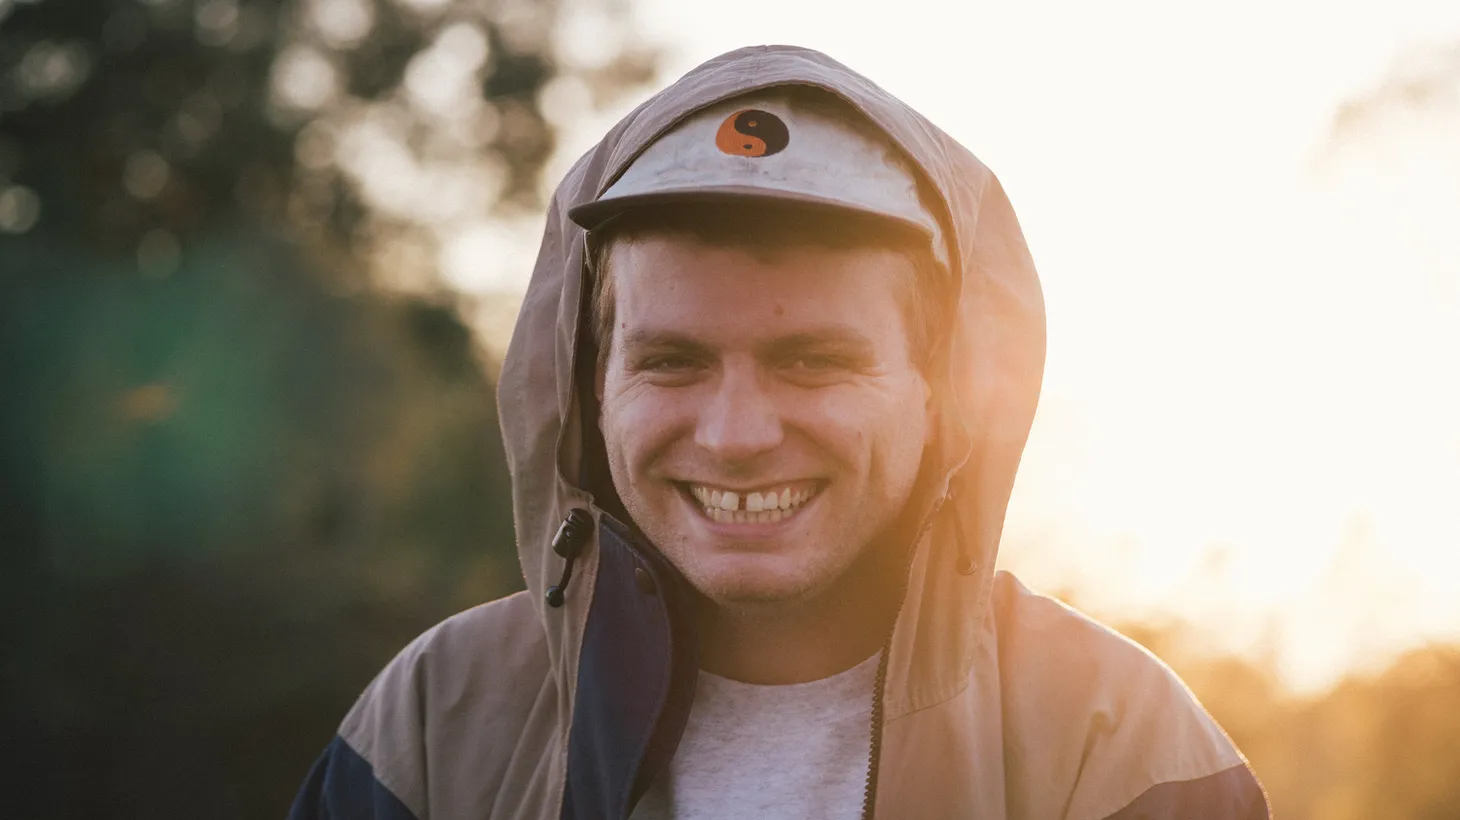 Mac DeMarco moved from his isolated home in Queens to Los Angeles with a grip of demos in hand. The change of pace, as he took a break from nonstop touring and recording to adapt to his new home, allowed him to take a more personal approach.